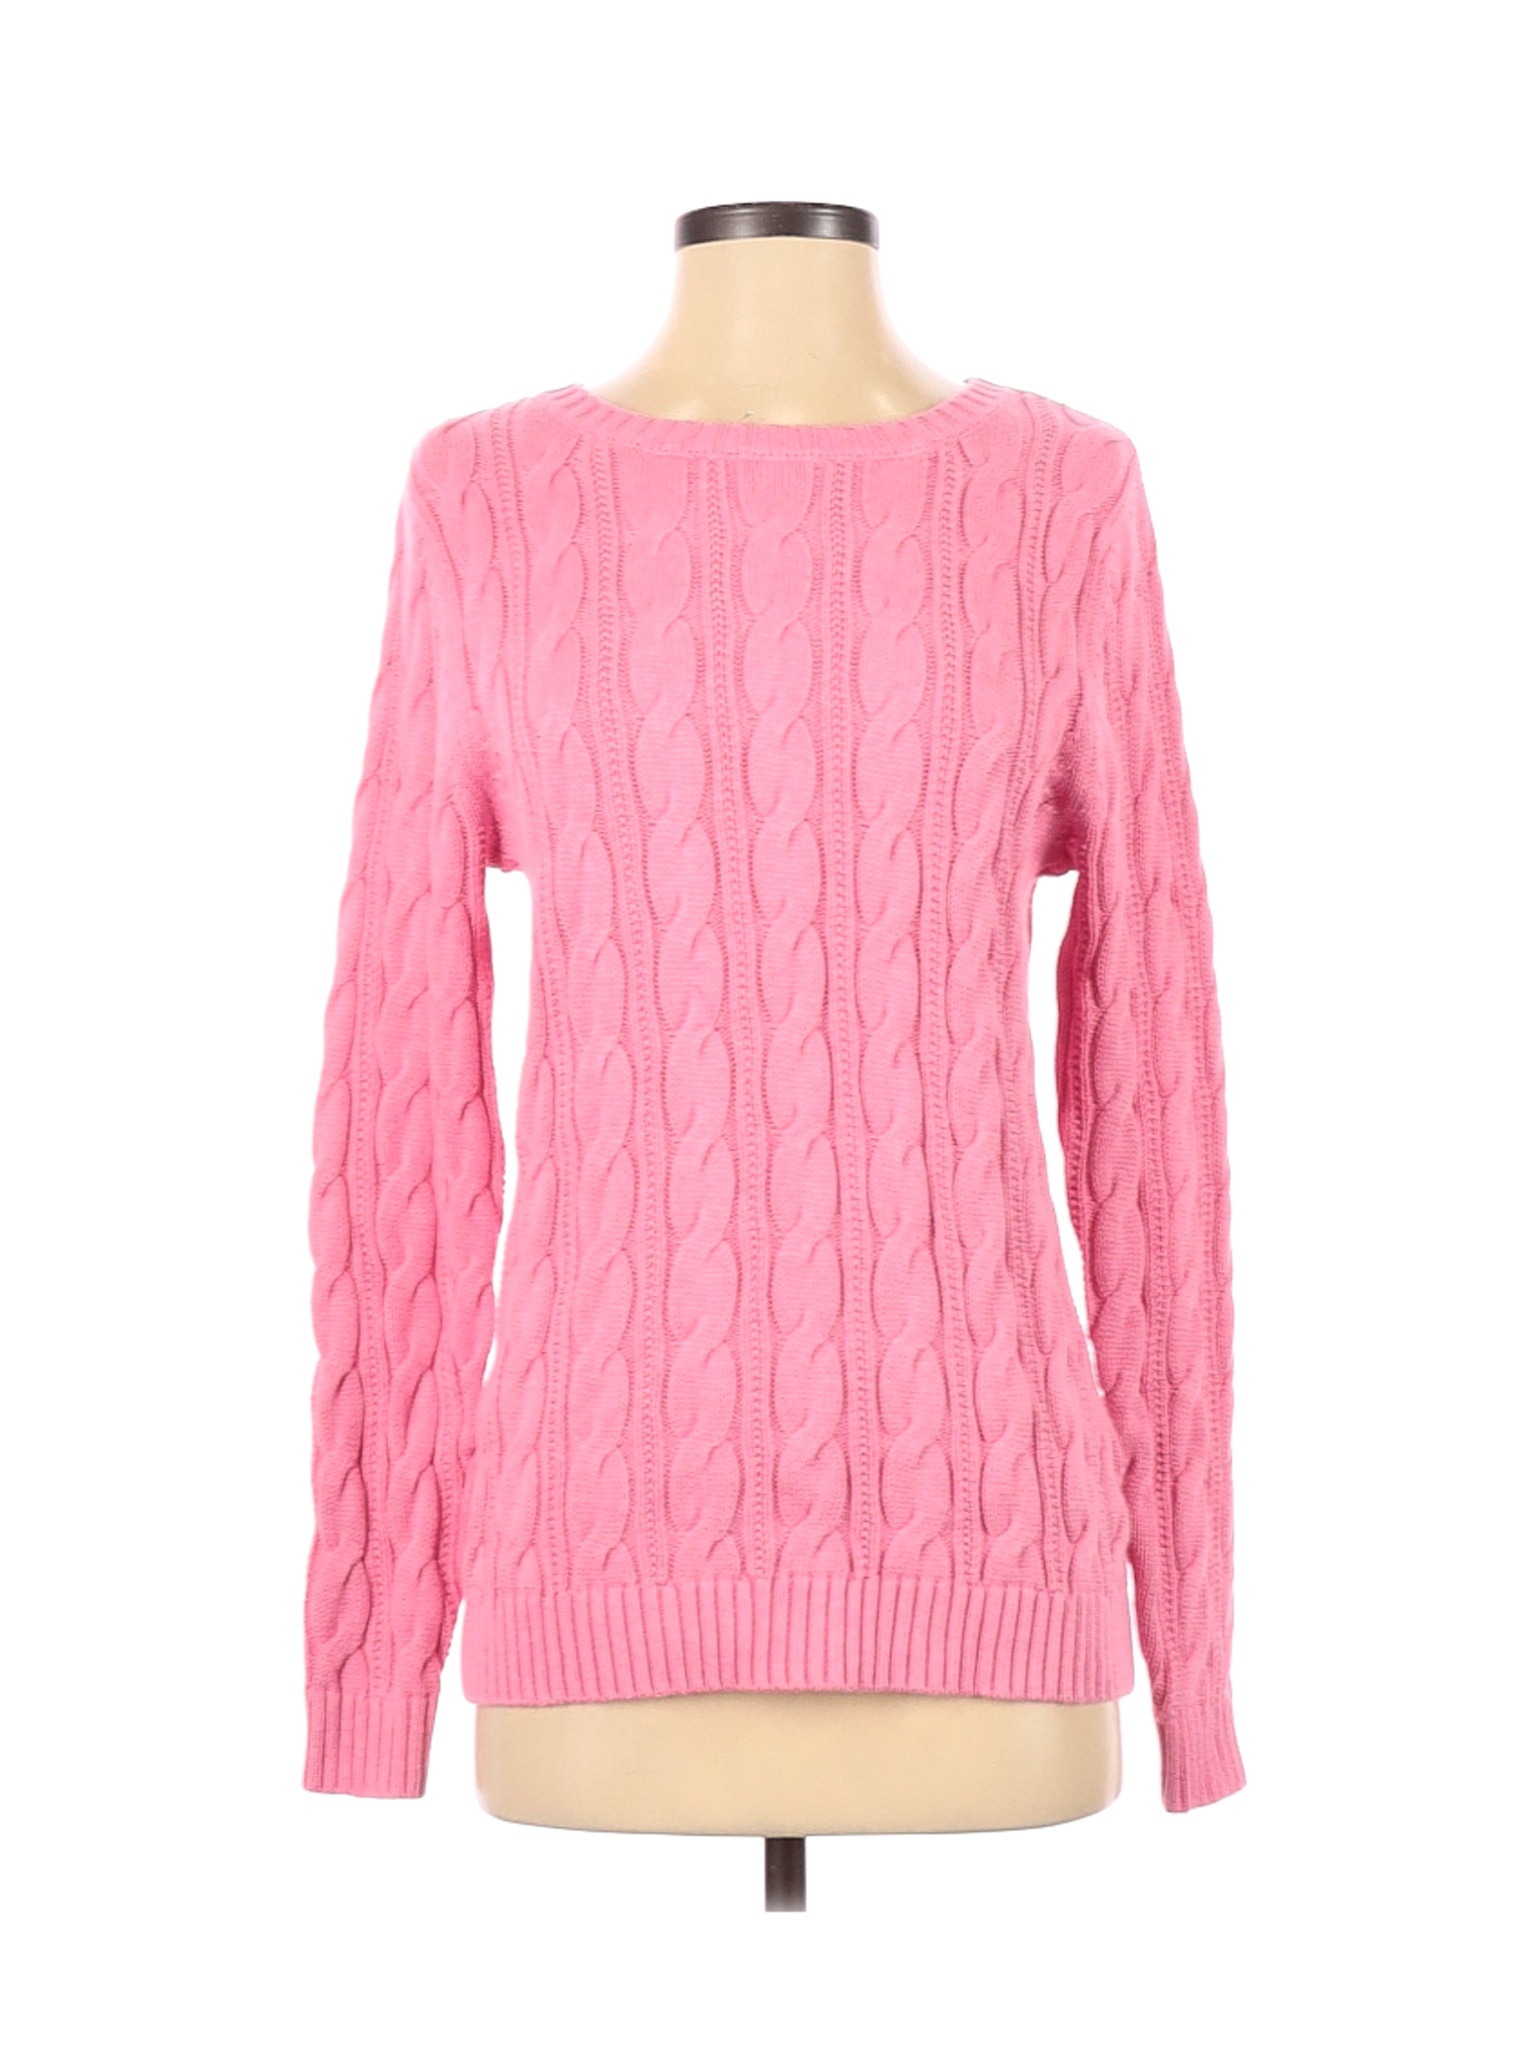 NWT Lands' End Women Pink Pullover Sweater S | eBay